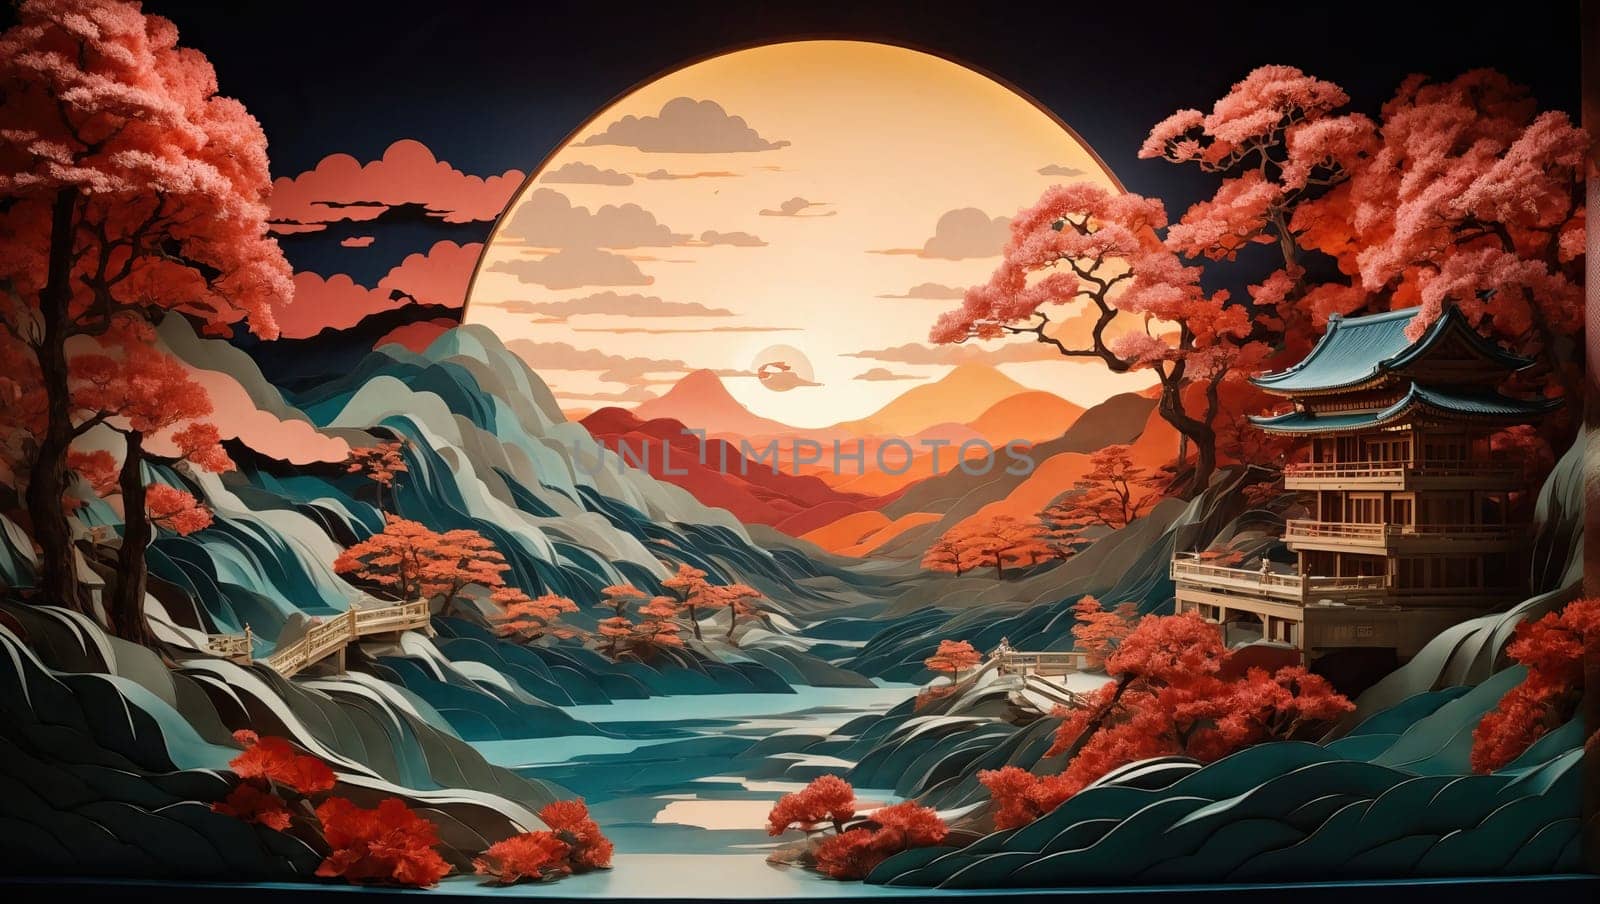 Paper art landscape with pagoda, lake, mountains by applesstock